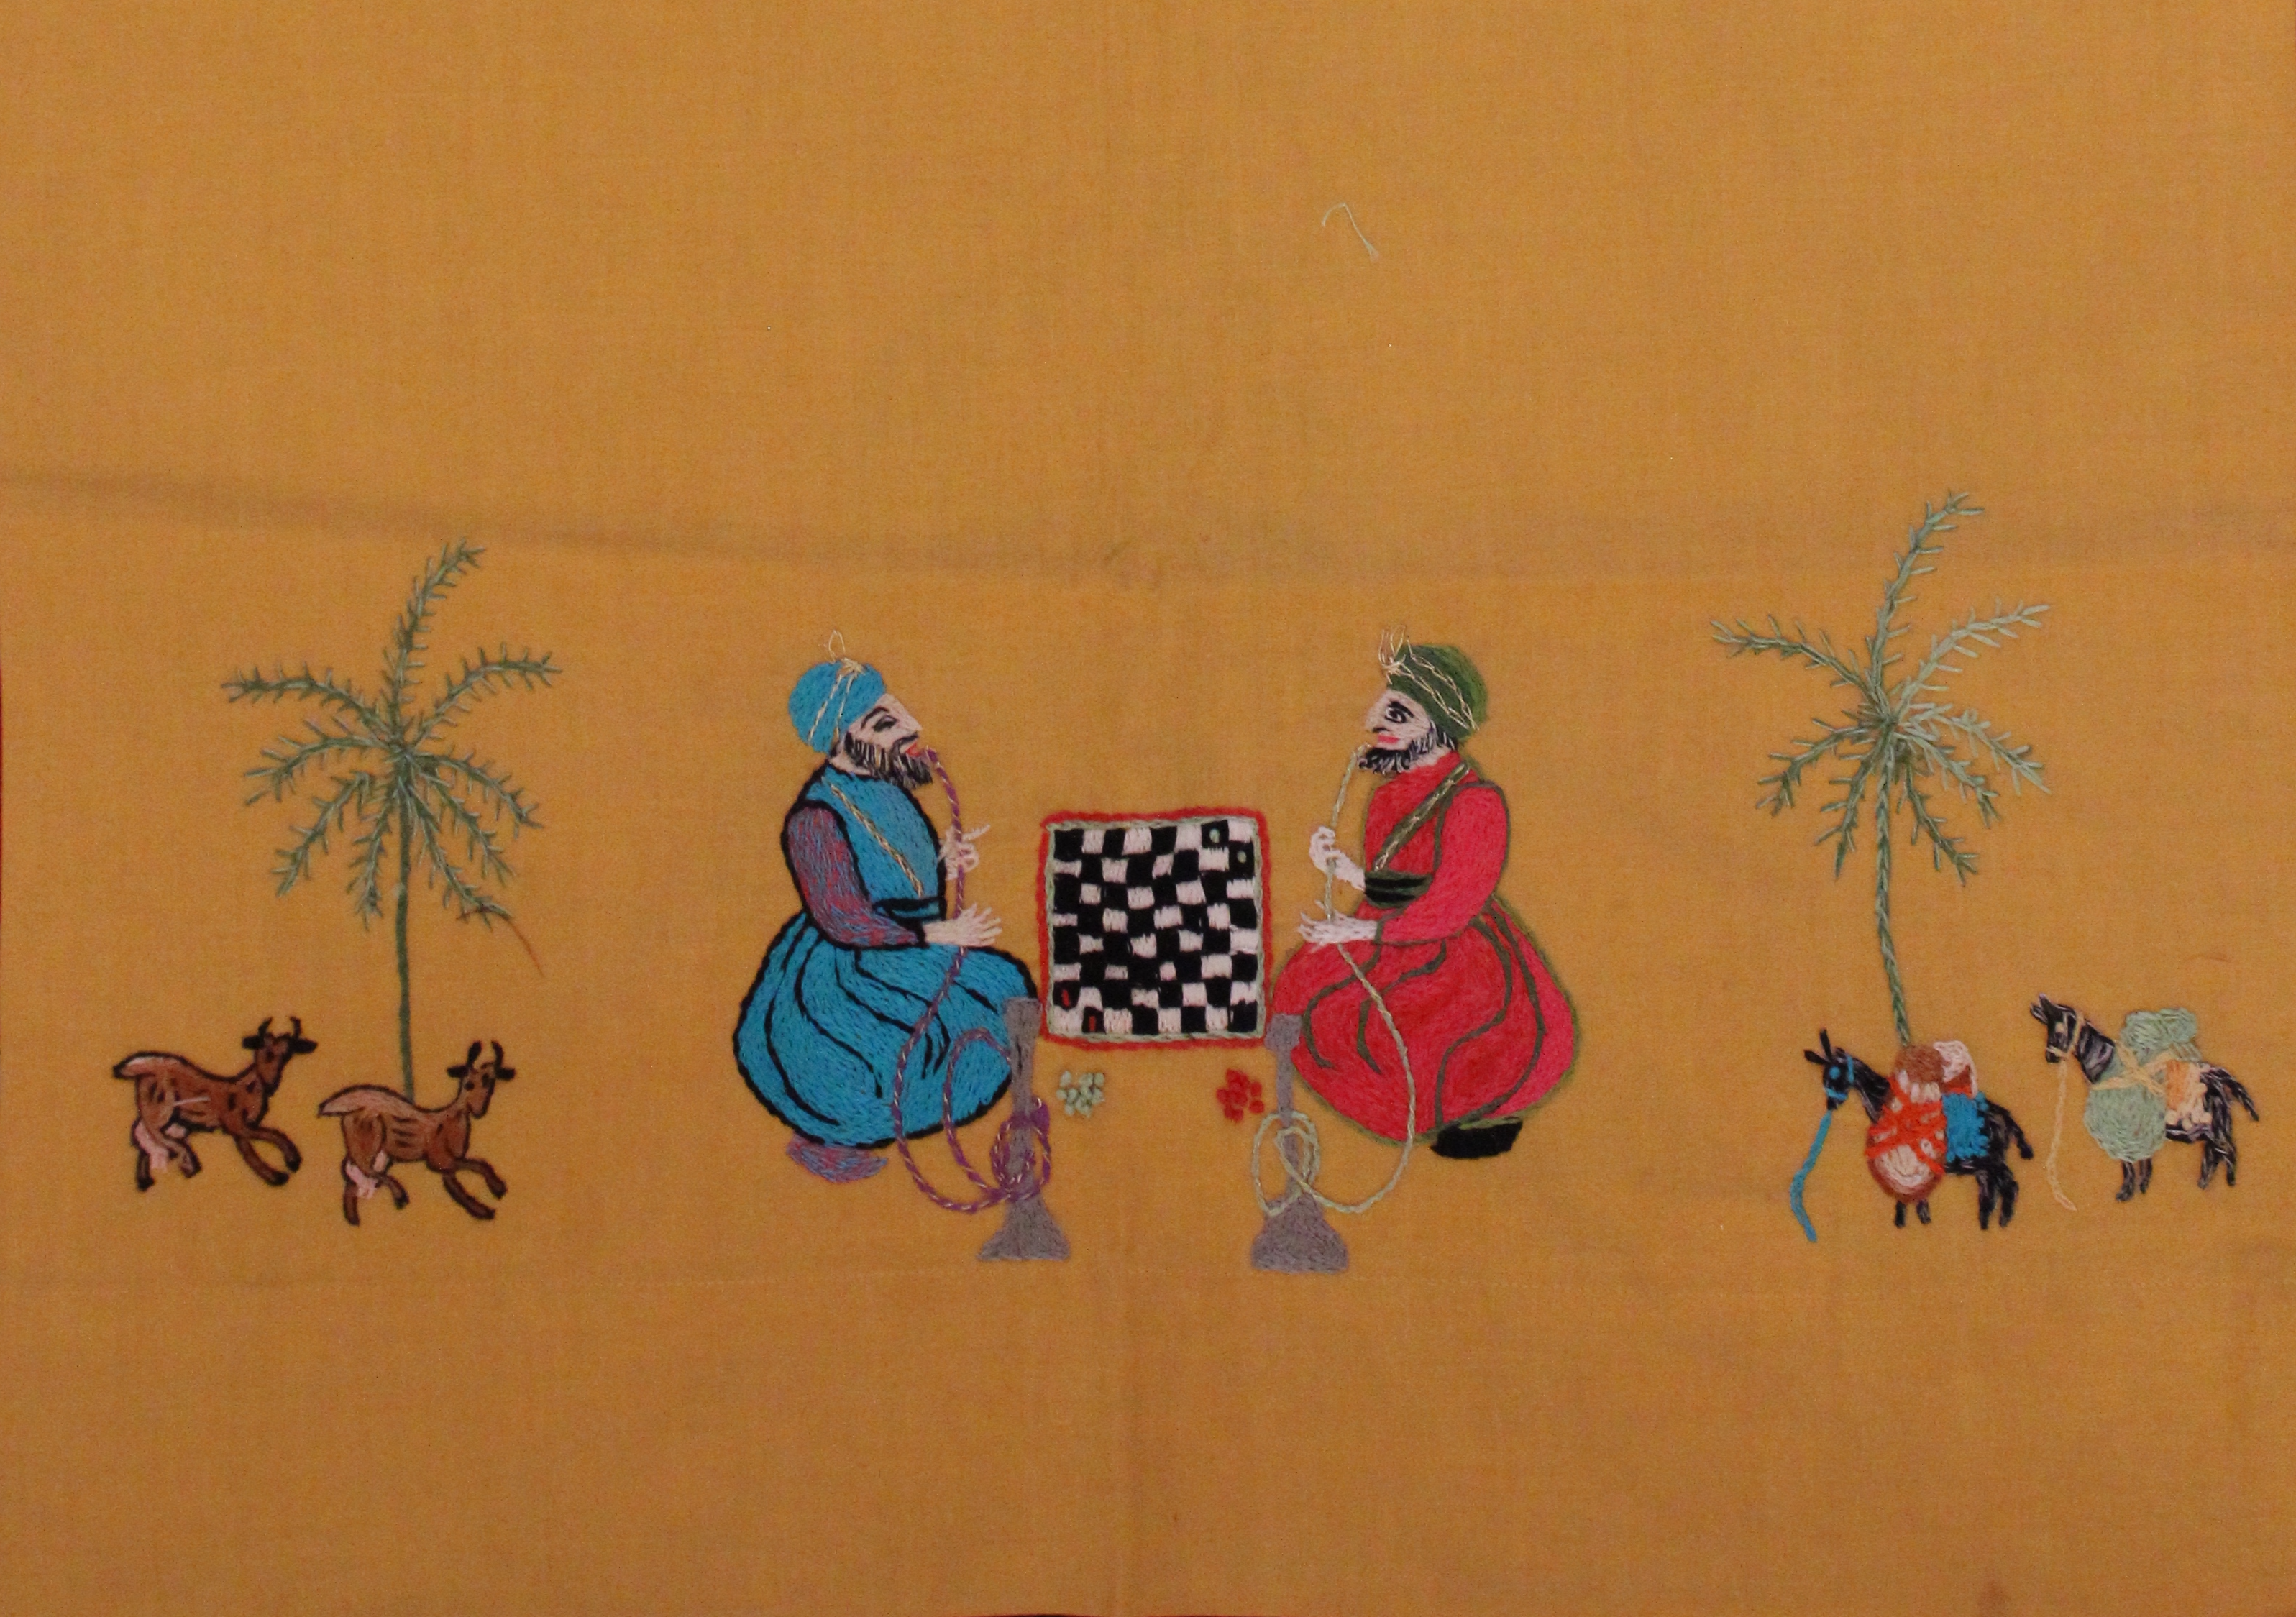 Embroidered scene of two men with hookah pipes seated on the ground across from a checkerboard 